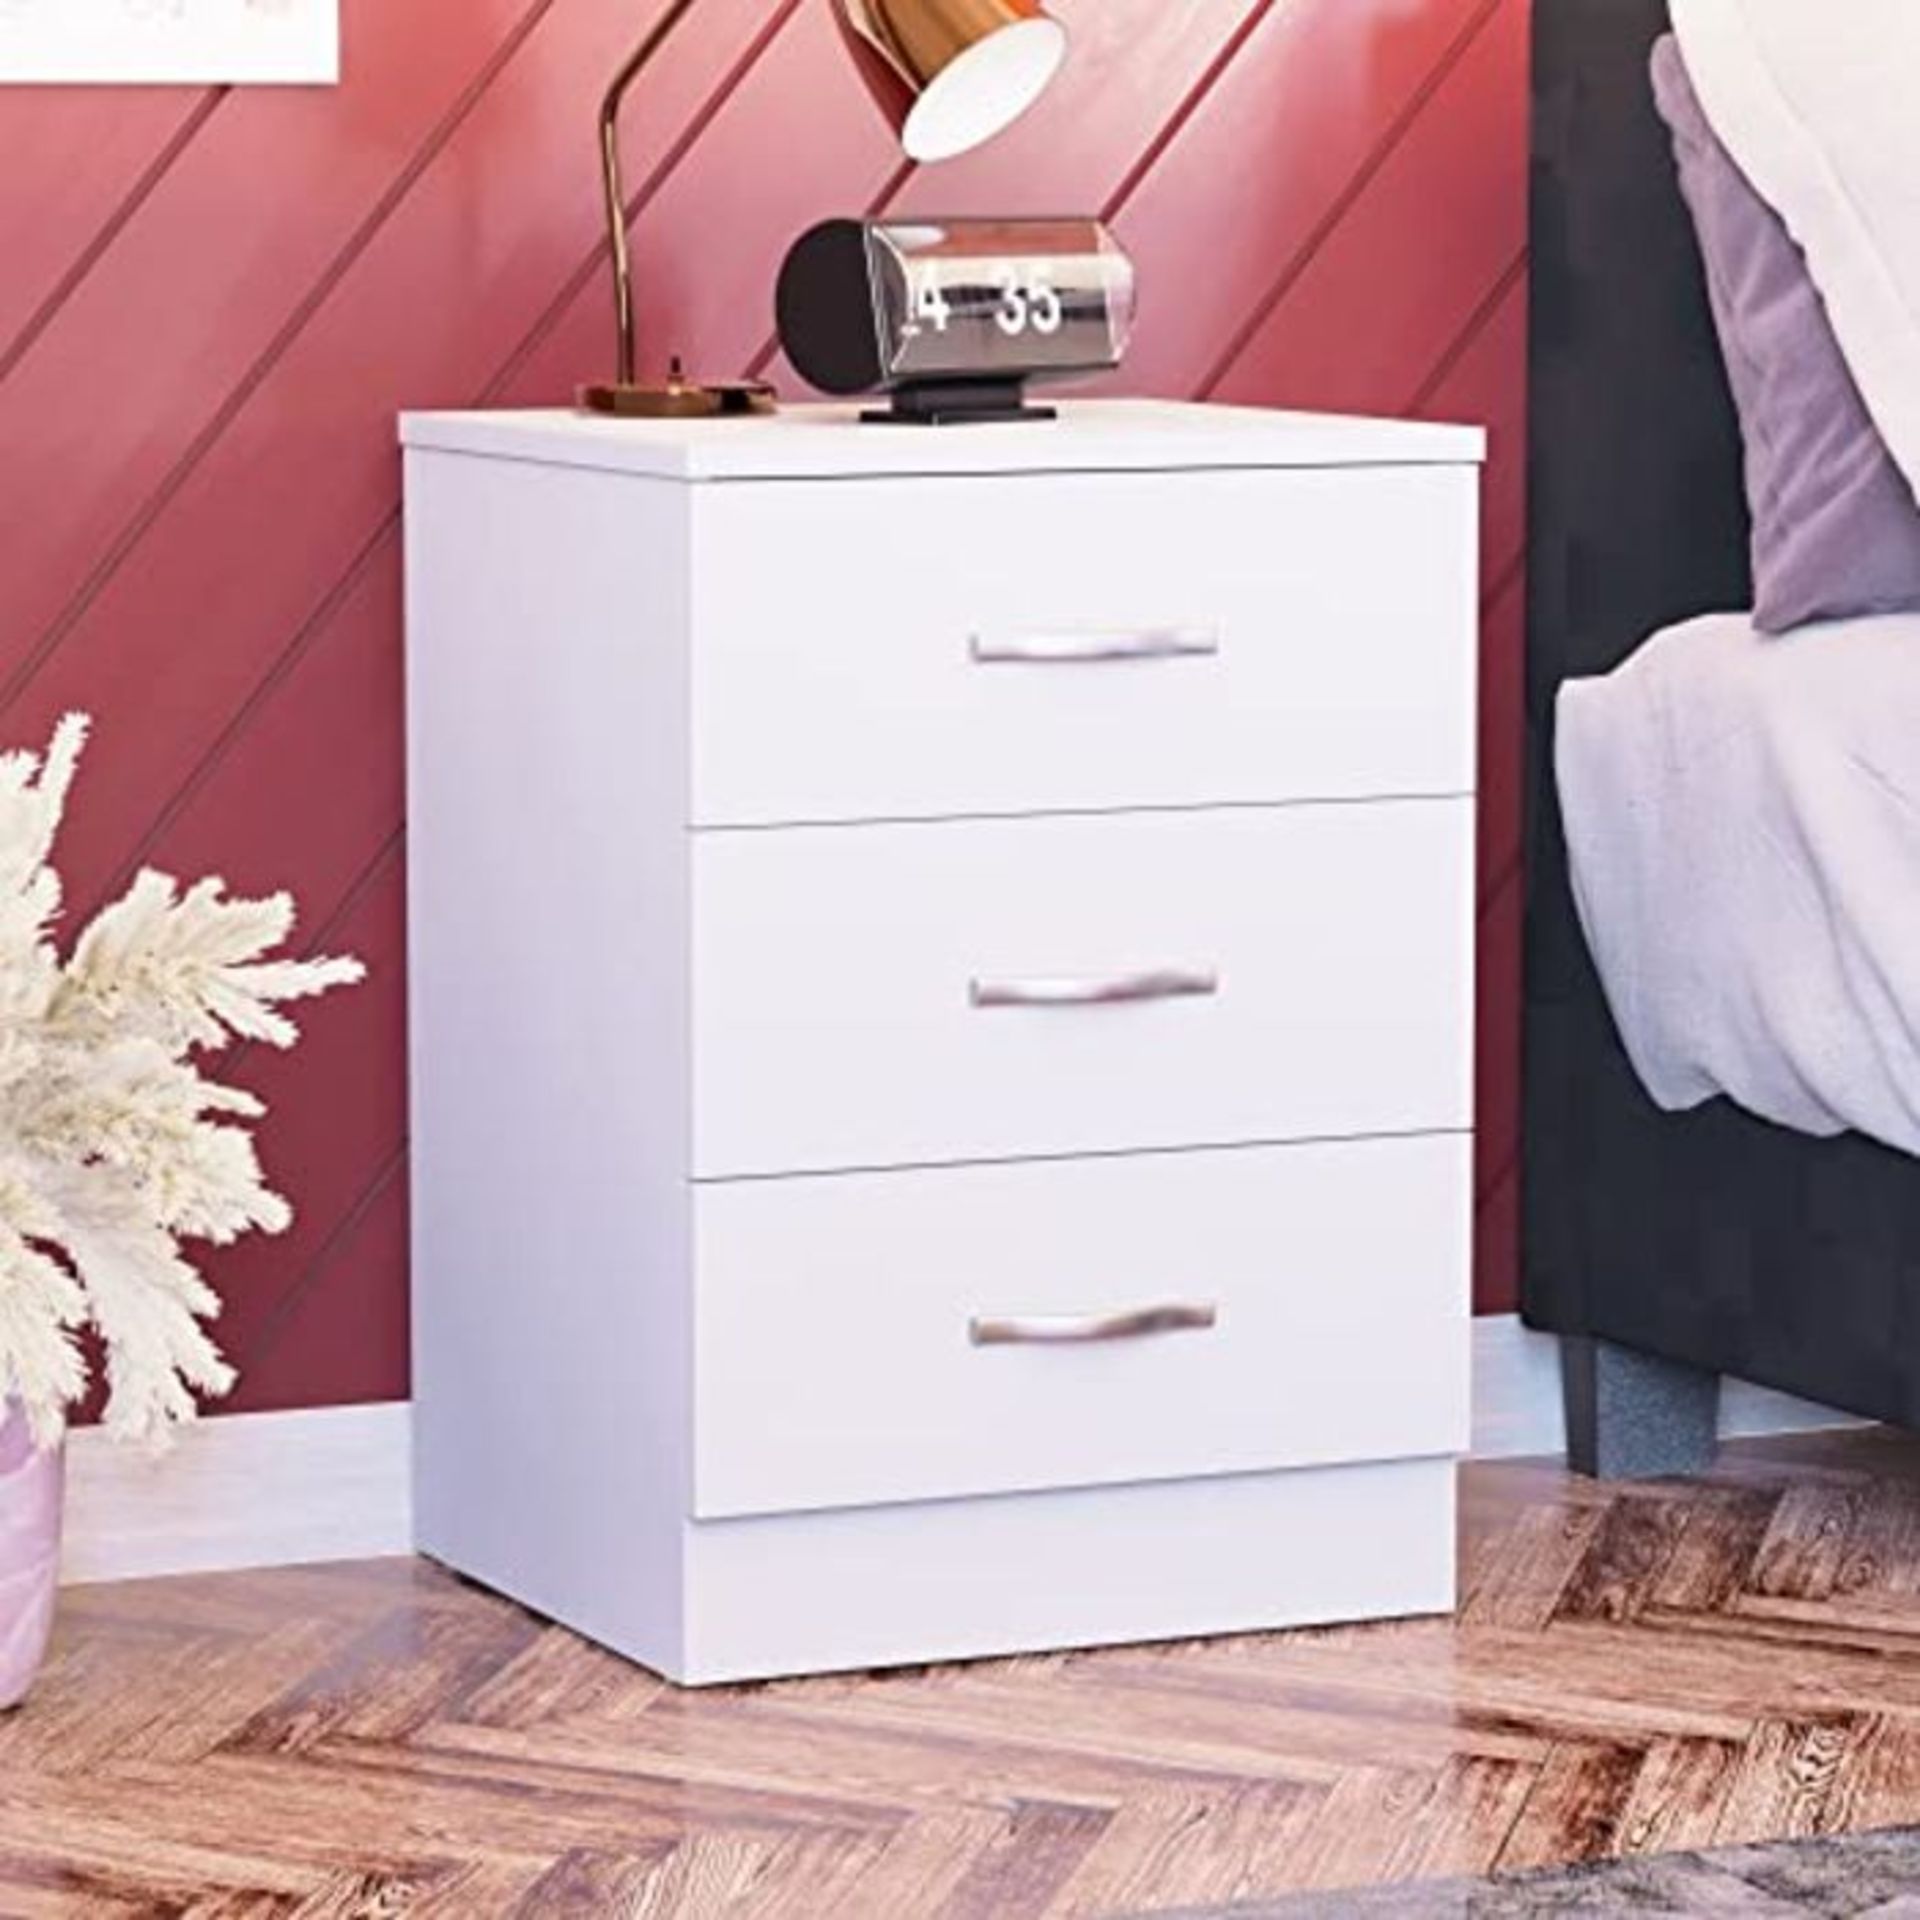 Vida Designs White Bedside Cabinet Chest of Drawers, 3 Drawer With Metal Handles and R